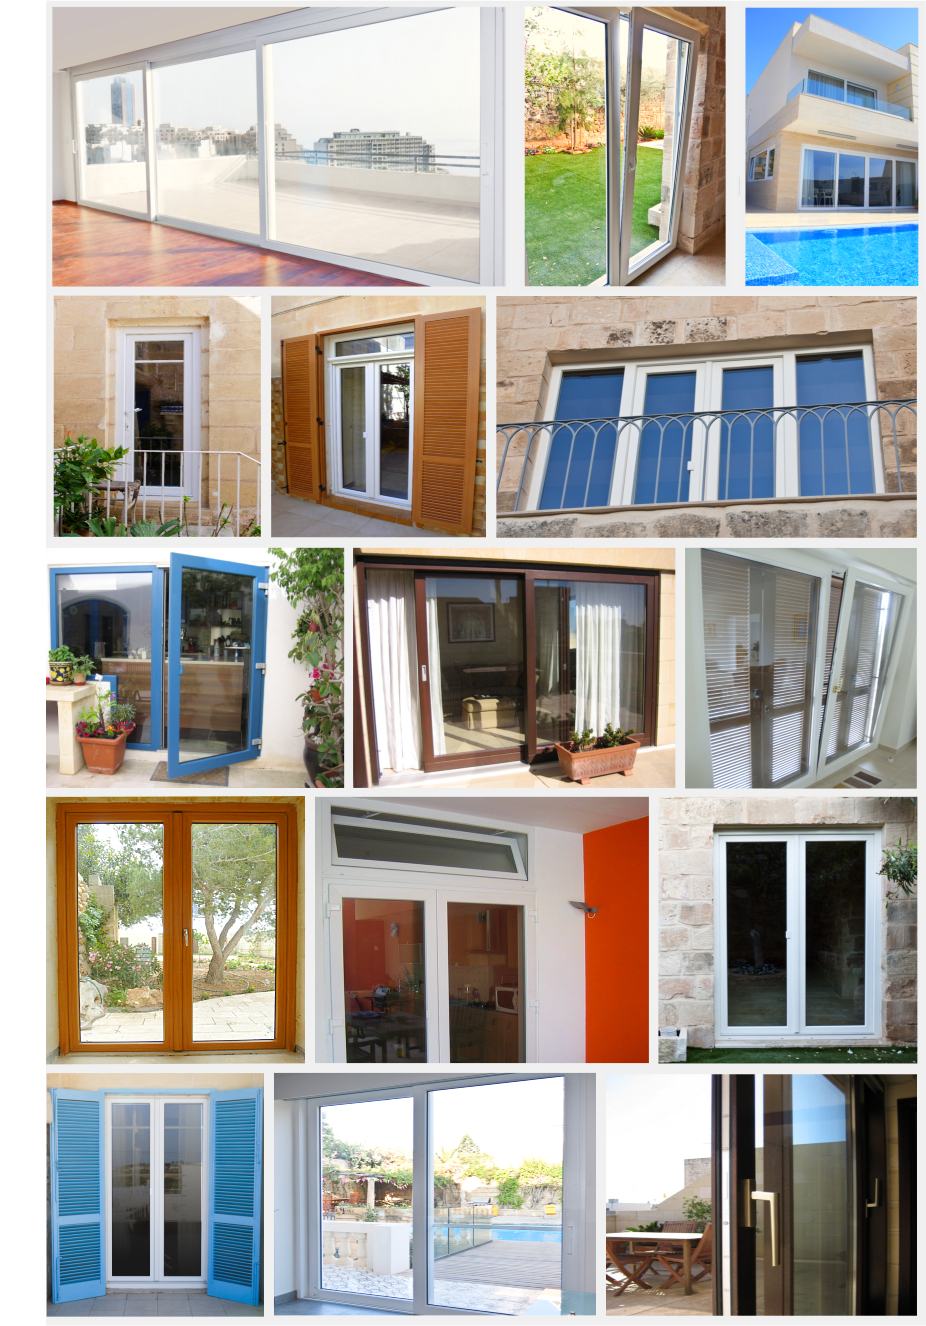 Doors in Malta, Designed and Supplied by AM Projects Malta